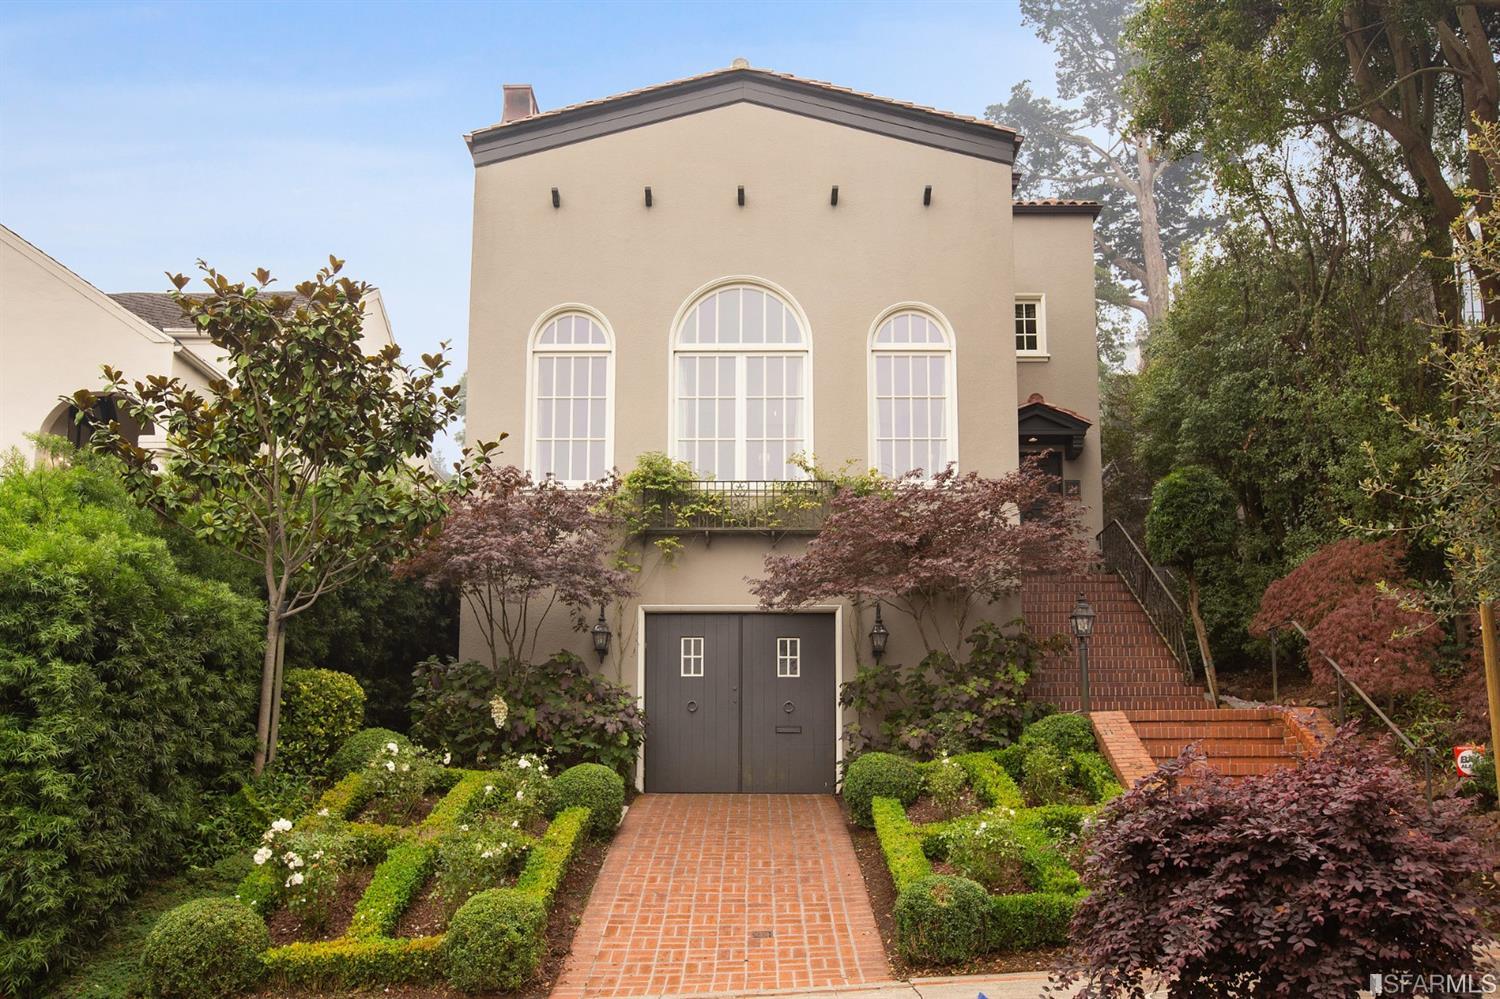 Built in 1925.  Architect – Reuben Richard Irvine, a prolific residential San Francisco architect, later of Irvine and Ebbets.  Owner has original plans from the UC Berkeley Archives of St. Francis Wood architecture. Recent expansion and improvements were designed by Gast Architects* and built by Caruso Construction.